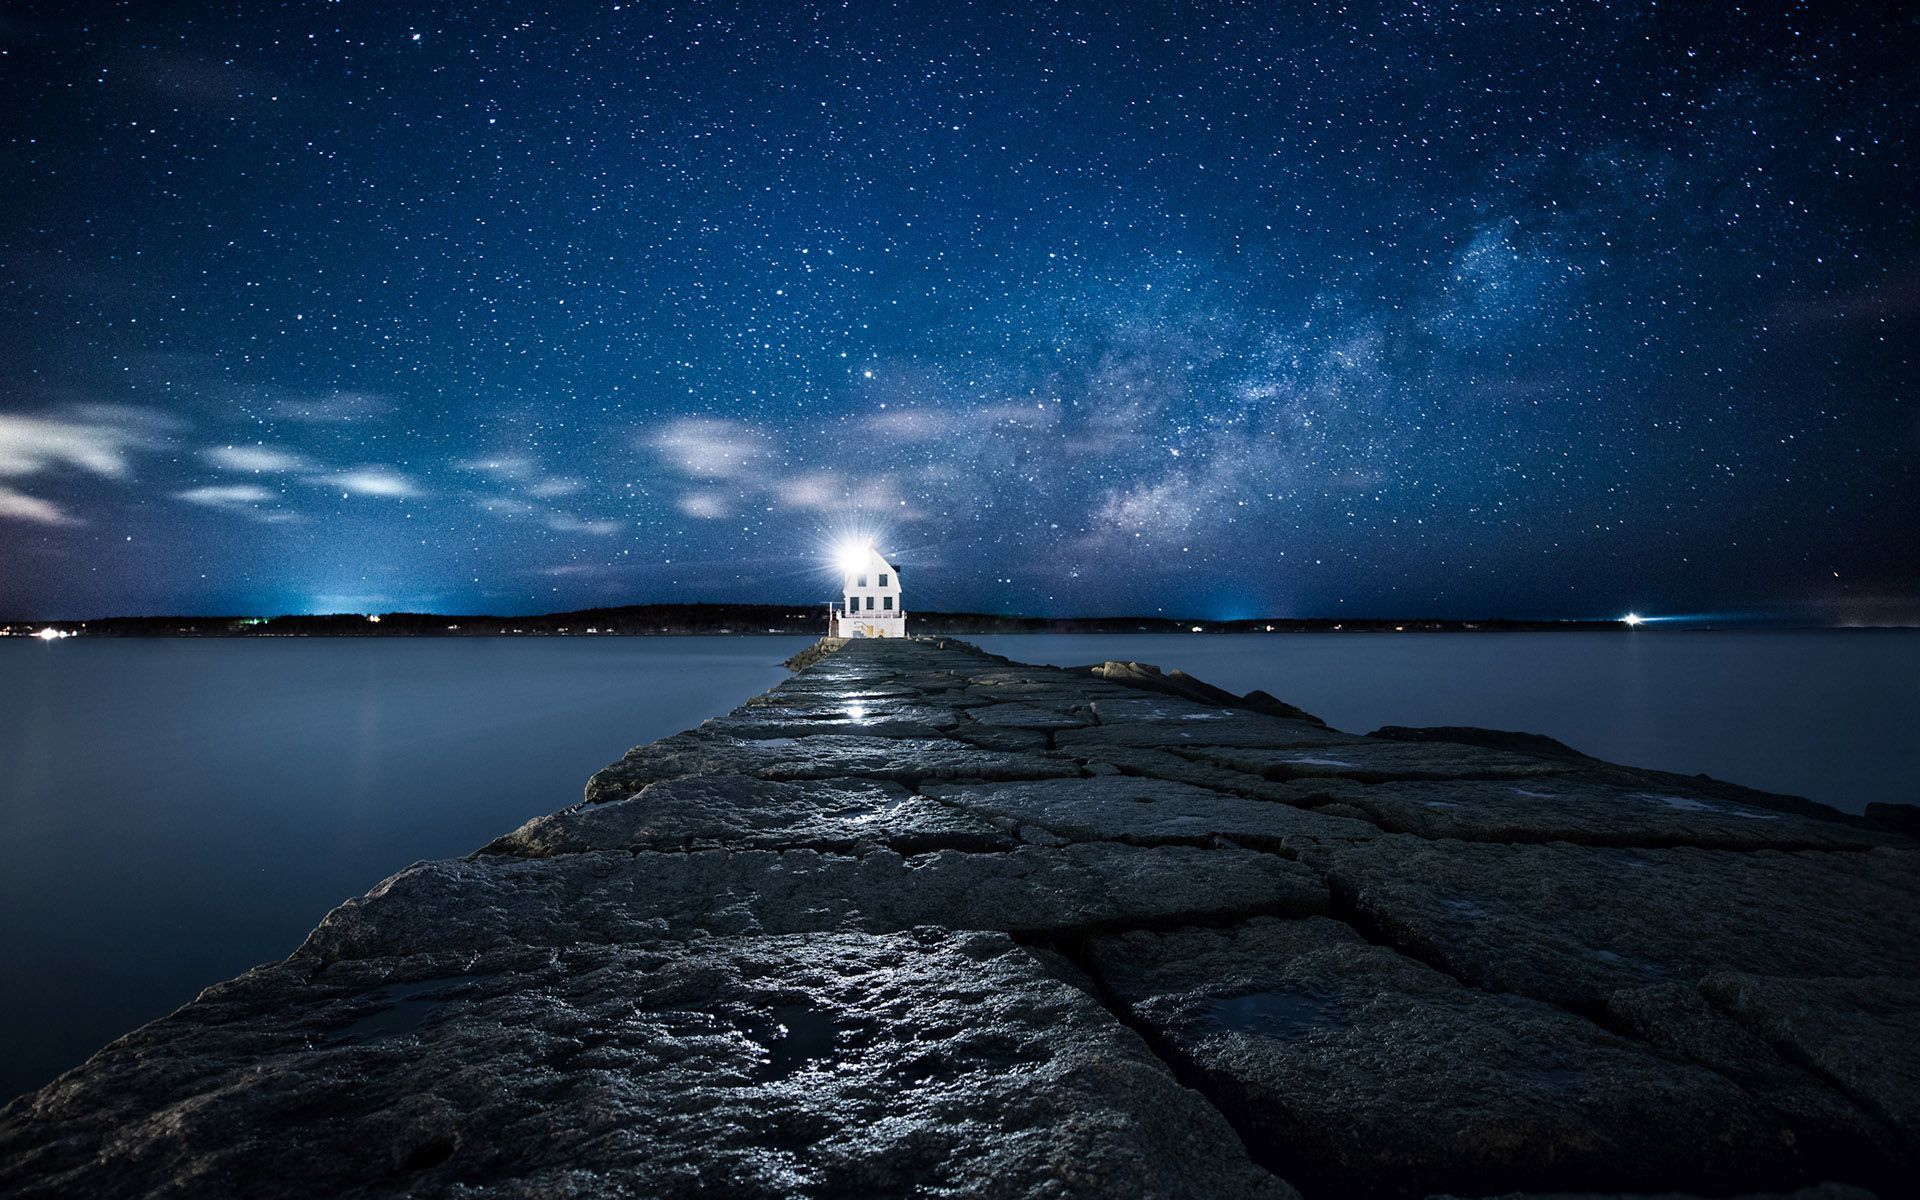 Free Download Lighthouse Under The Starry Sky Hd Wallpaper Hd Latest 19x10 For Your Desktop Mobile Tablet Explore 74 Starry Wallpaper Starry Night Wallpaper For Home Starry Night Sky Desktop Wallpaper